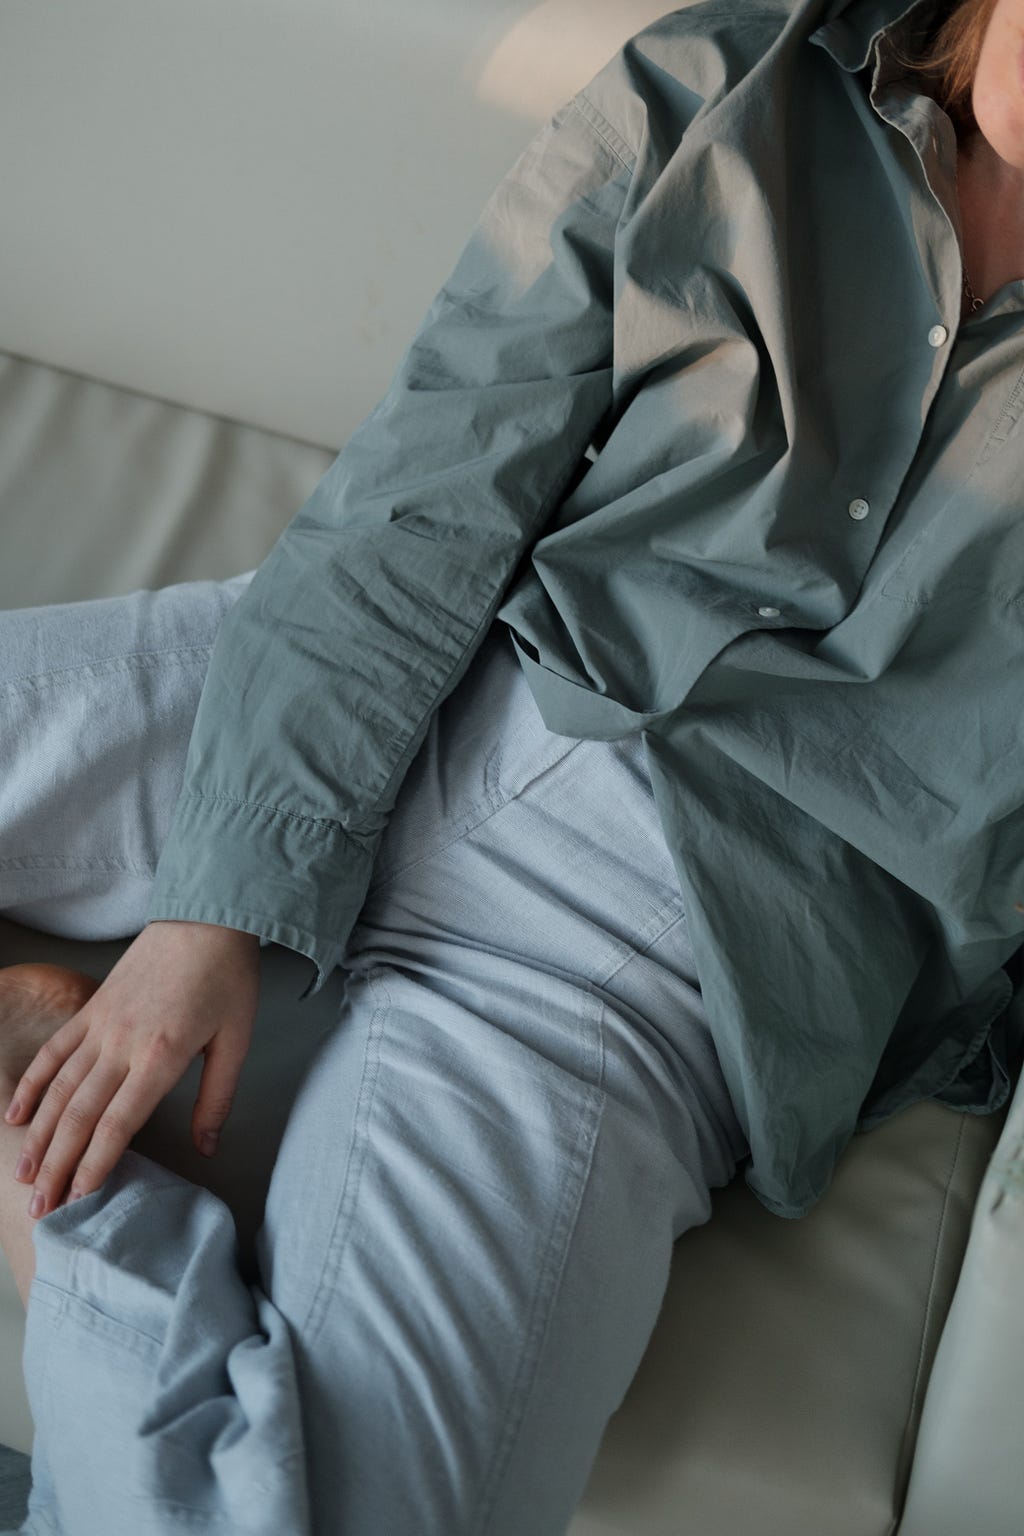 person lounging in light blue pants and top